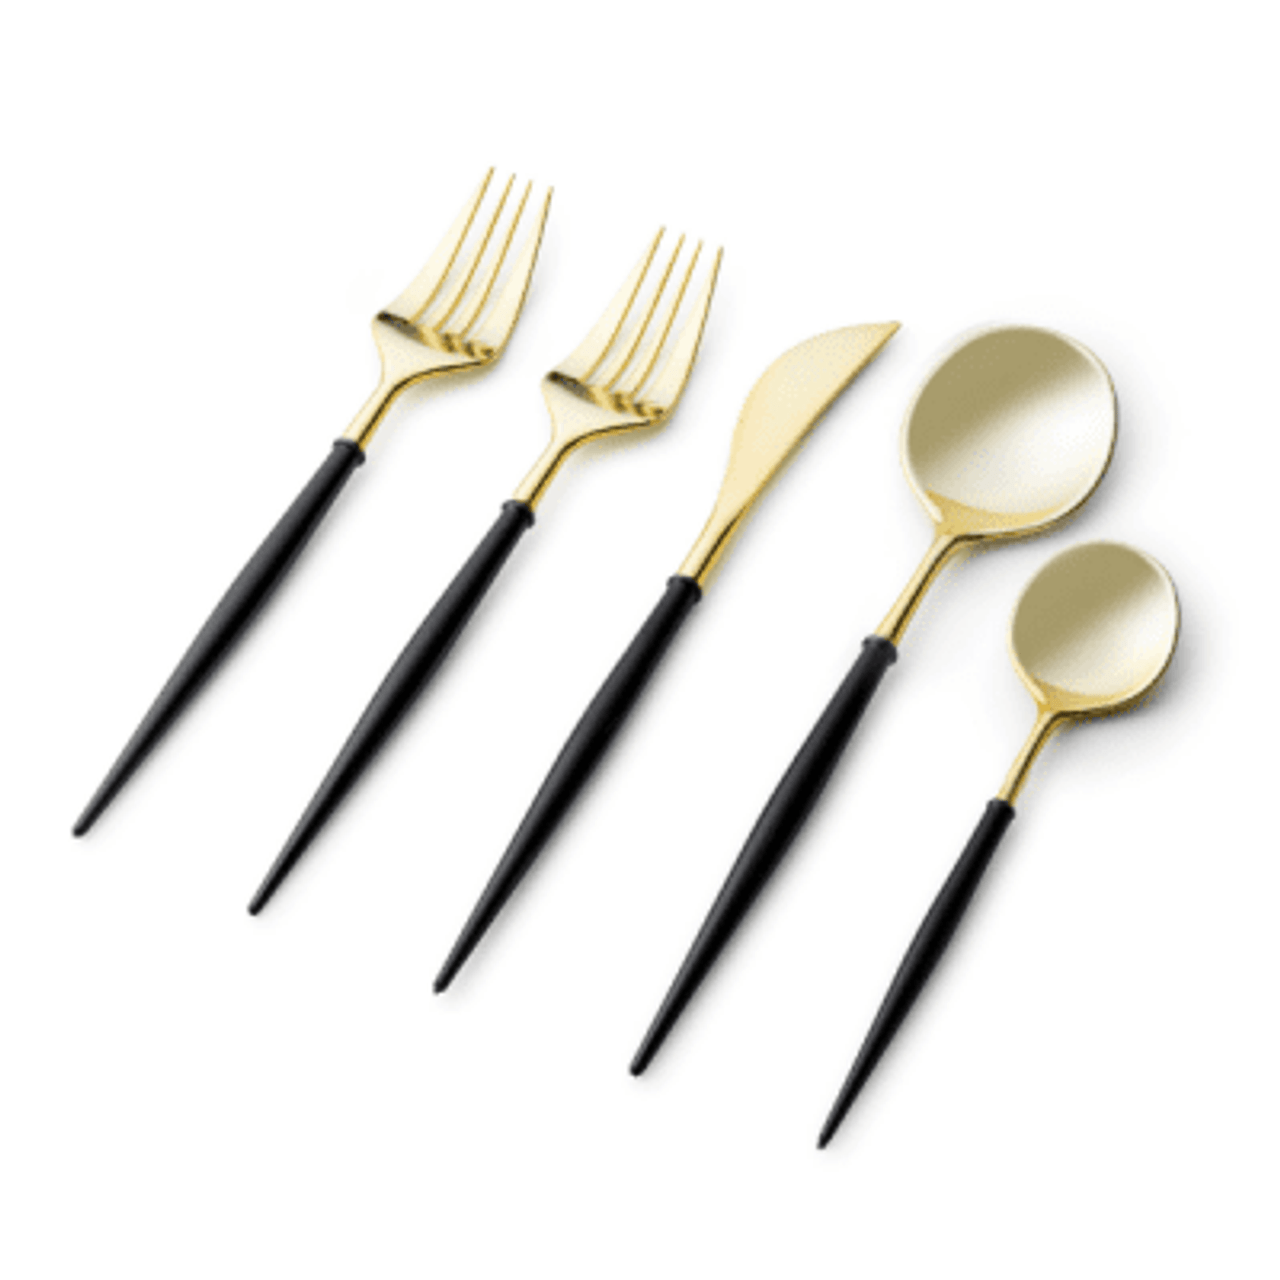 https://cdn11.bigcommerce.com/s-hgqmwywp99/images/stencil/1280x1280/products/51020/45803/noble-collection-two-tone-black-gold-plastic-wedding-cutlery-40pcs-1__45053.1675880420.png?c=1?imbypass=on